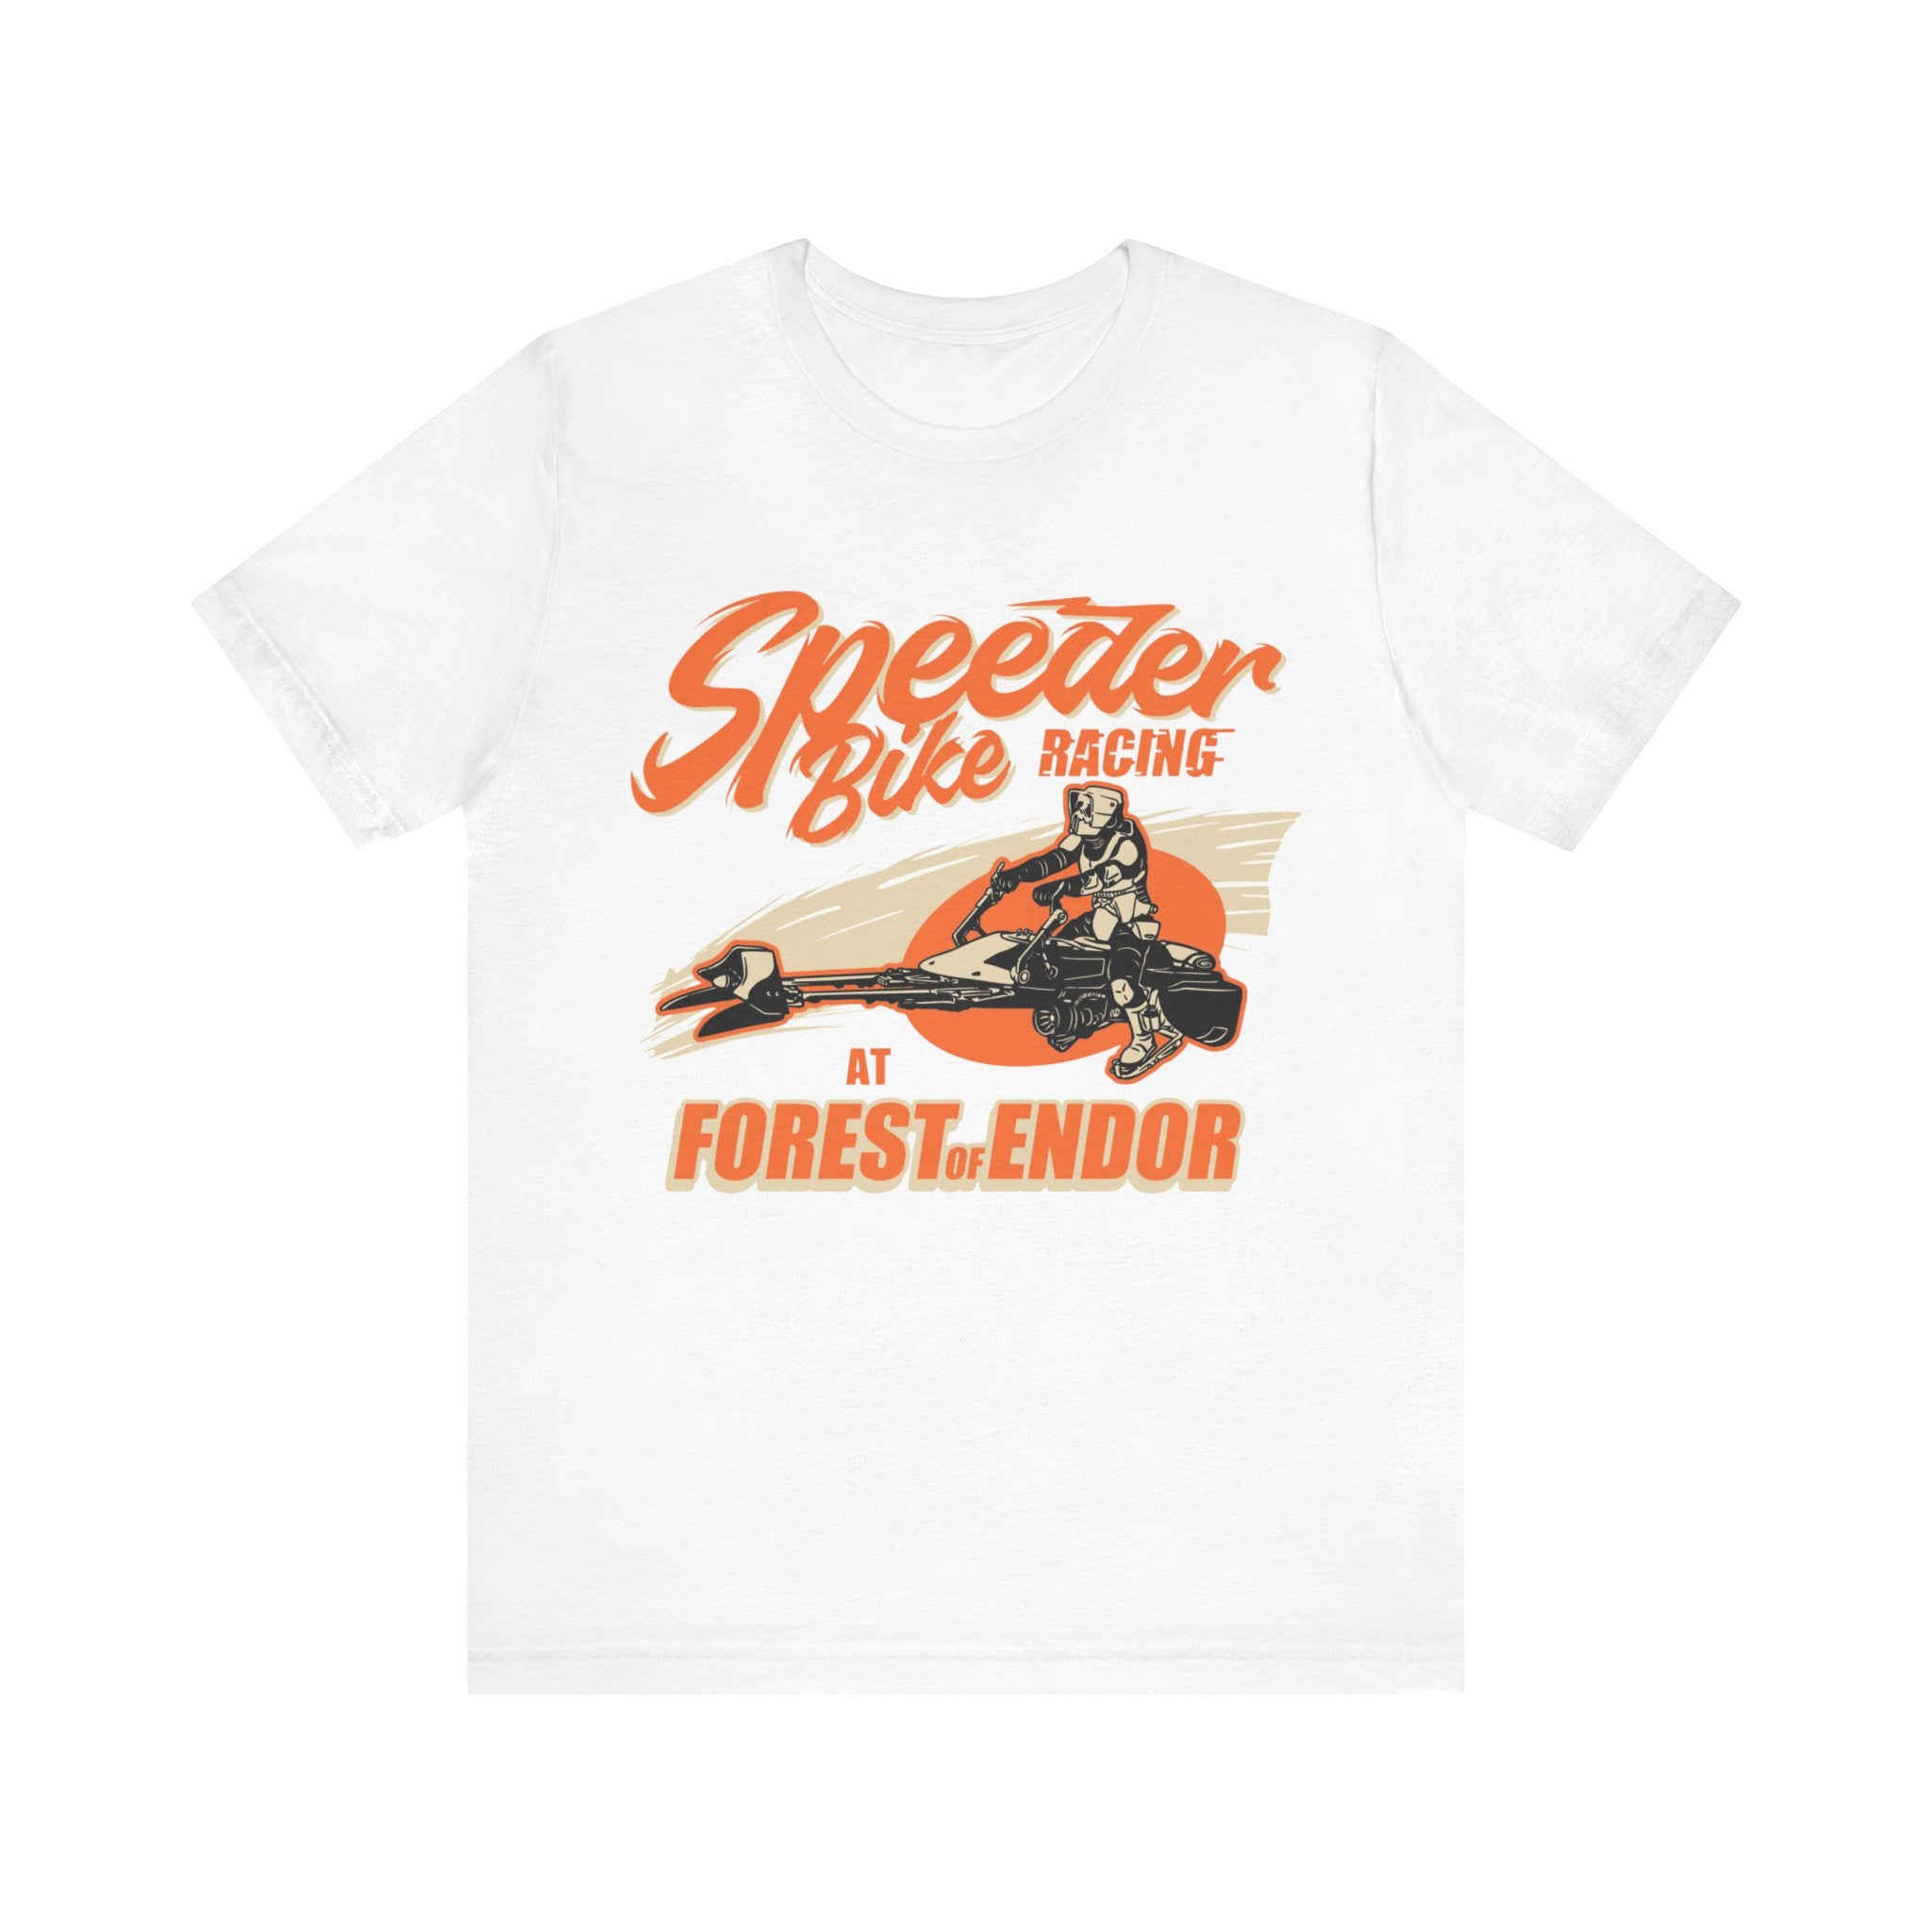 White jersey tee with a graphic of a person racing a Speeder Bike Racing in an orange and black design, featuring the text "Speeder Bike Racing at Forest Endor.